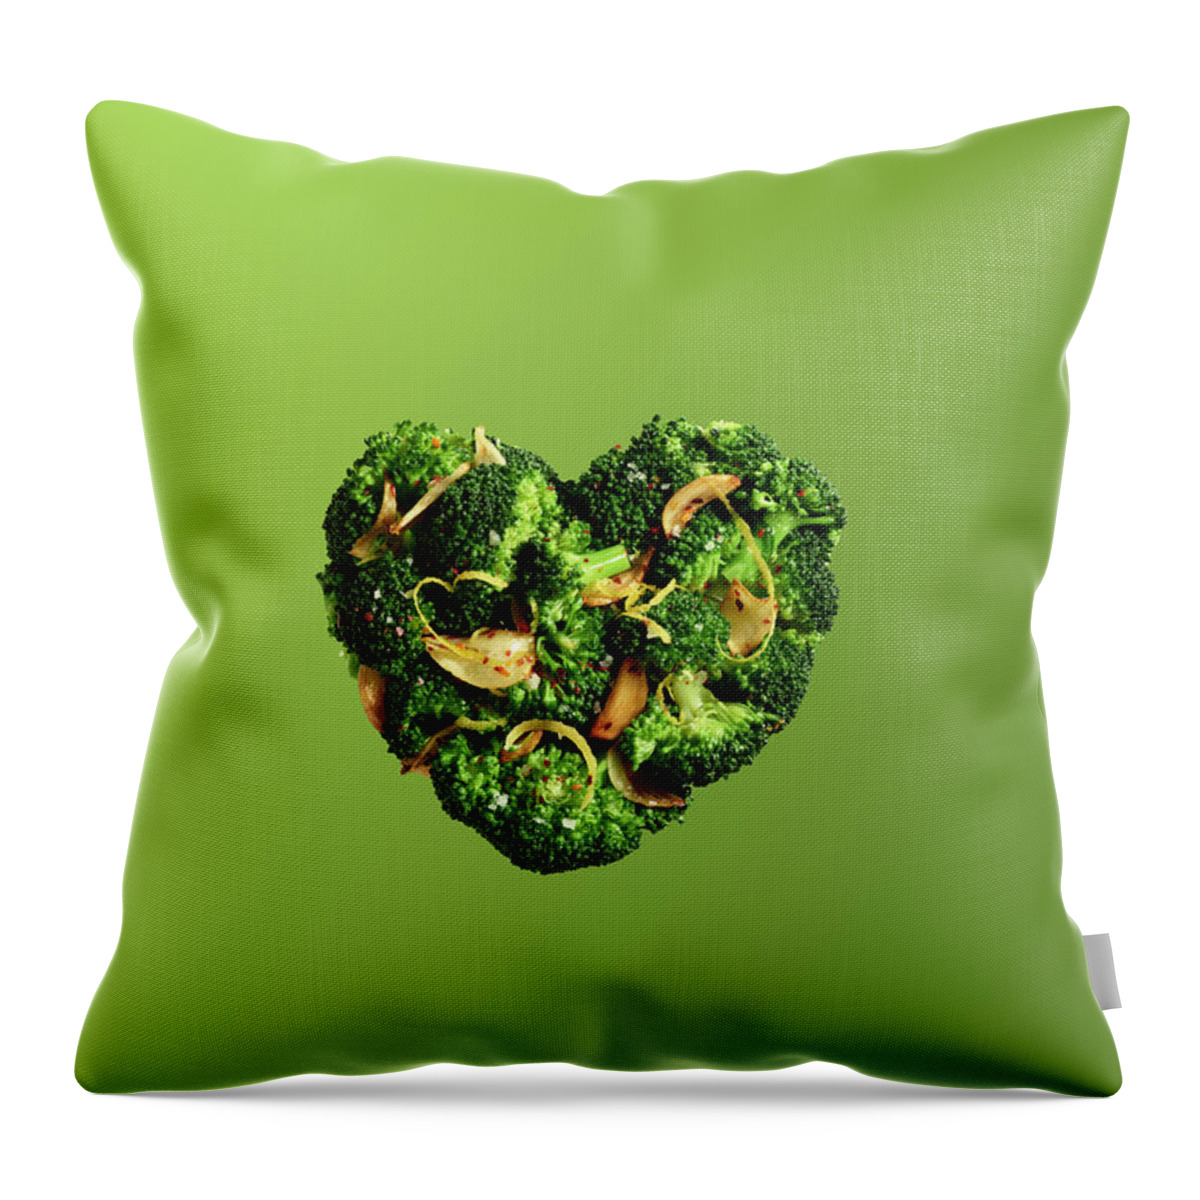 Broccoli Throw Pillow featuring the photograph Heart Shaped Broccoli On Green by Maren Caruso